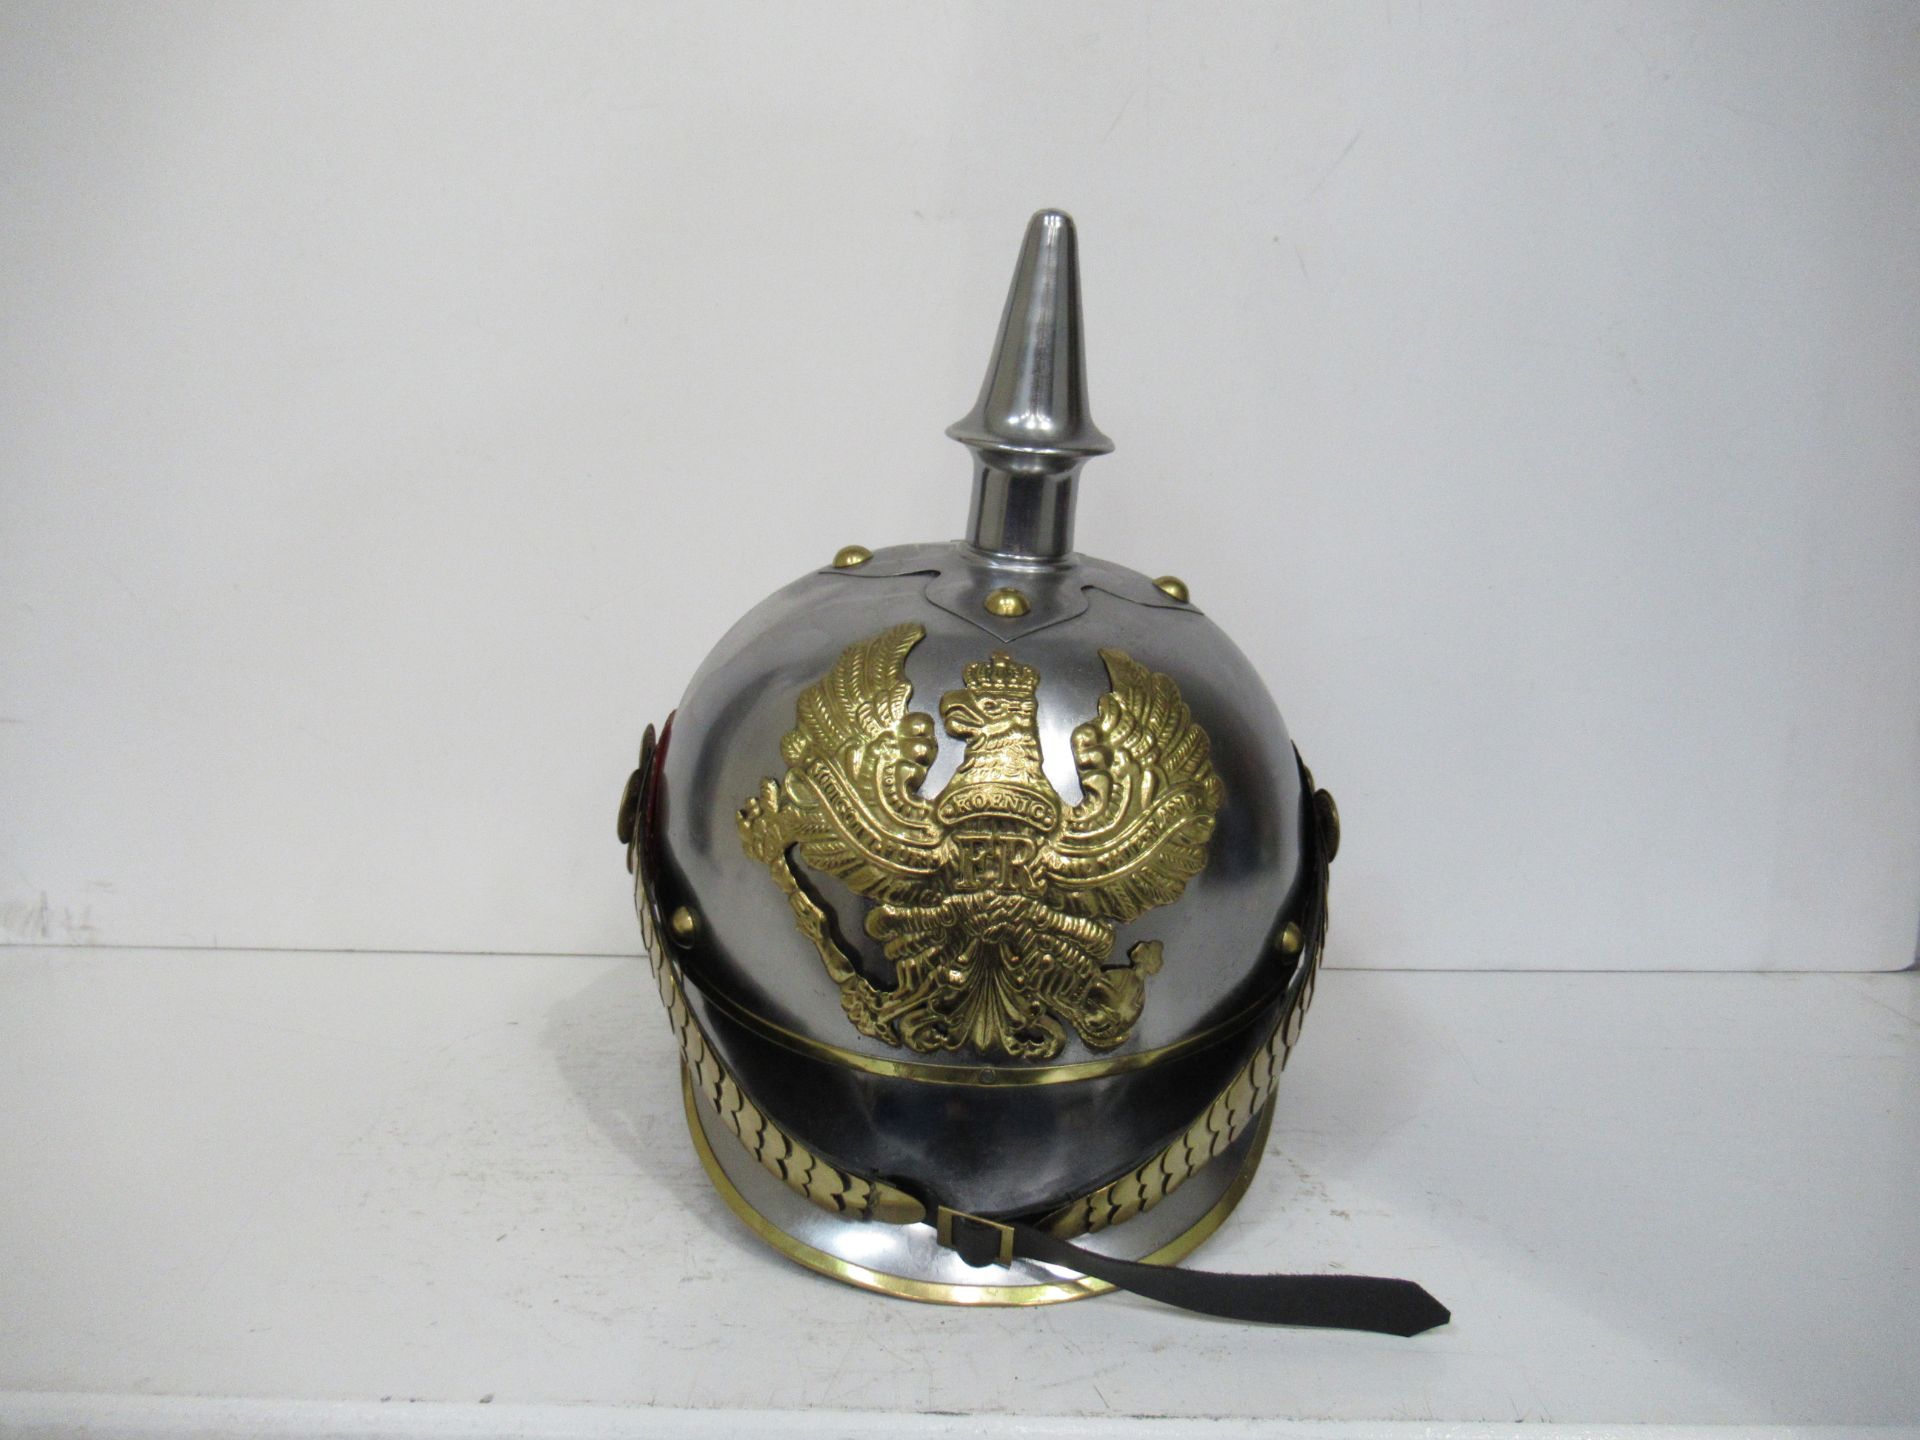 German Prussian Reproduction Helmet with Stand - Image 2 of 5